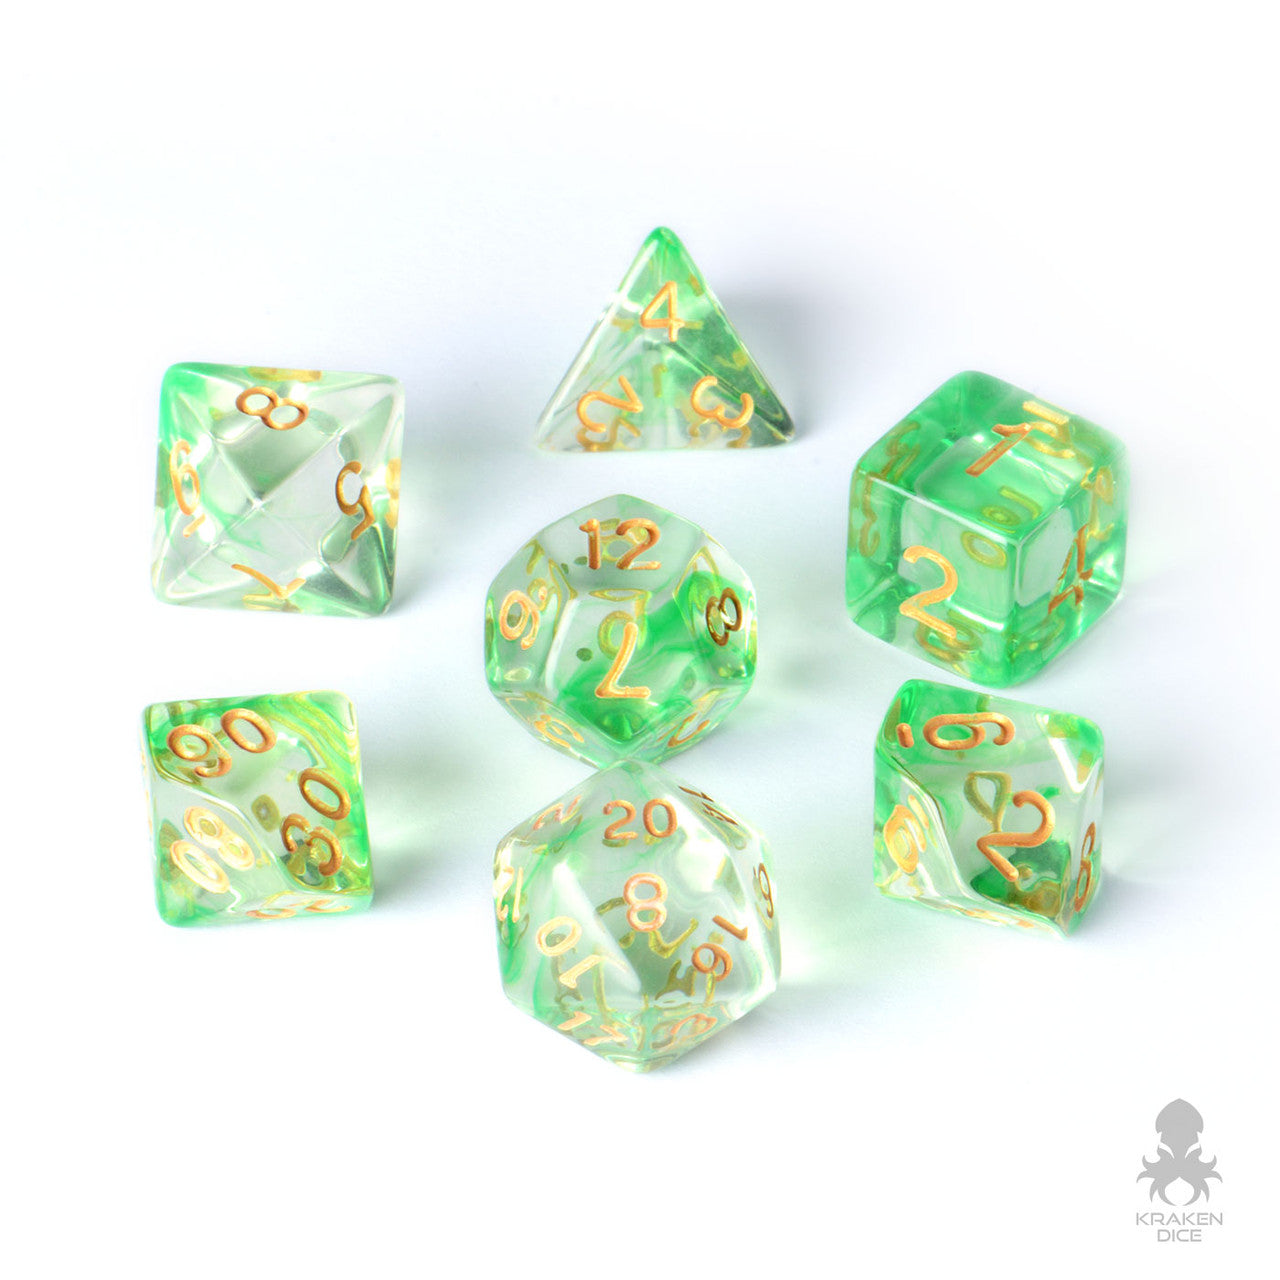 Verdant Fog Translucent 7pc Dice Set With Green Swirls and Gold Ink